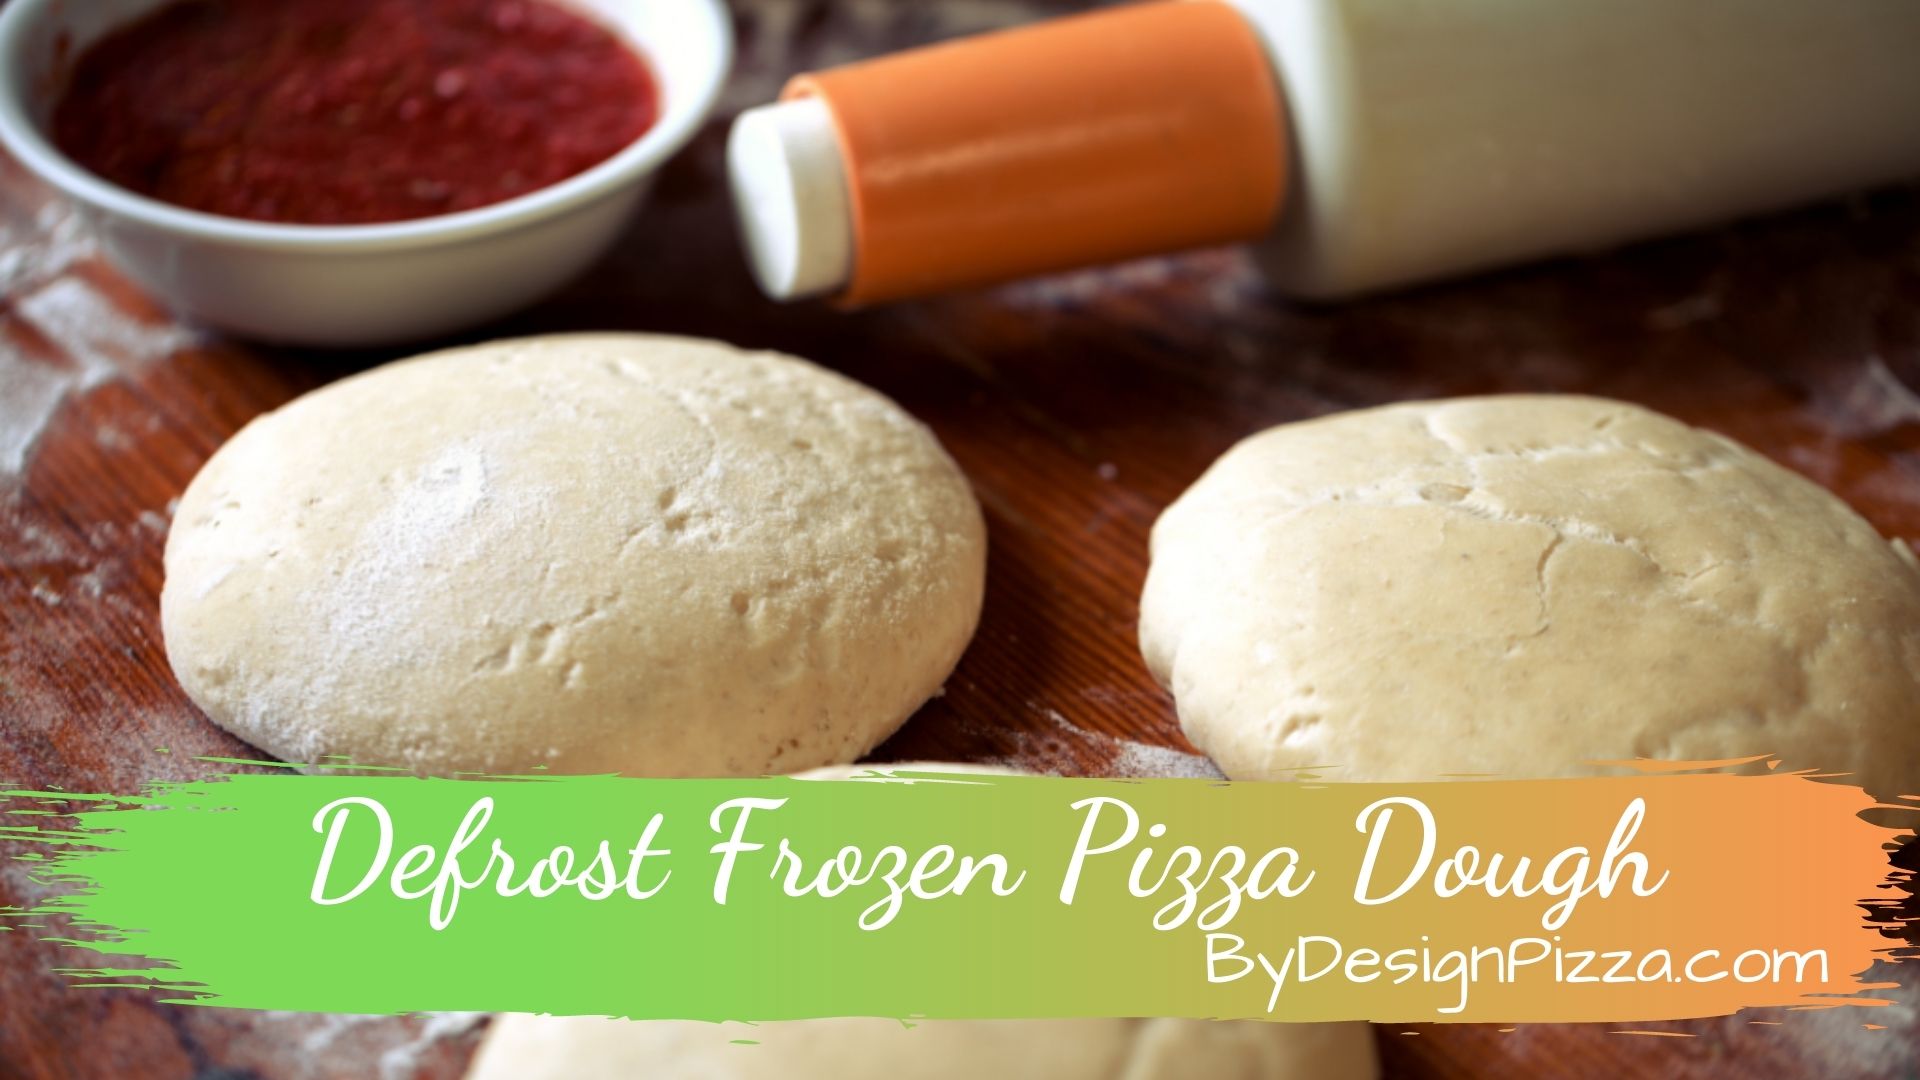 How To Defrost Pizza Dough?